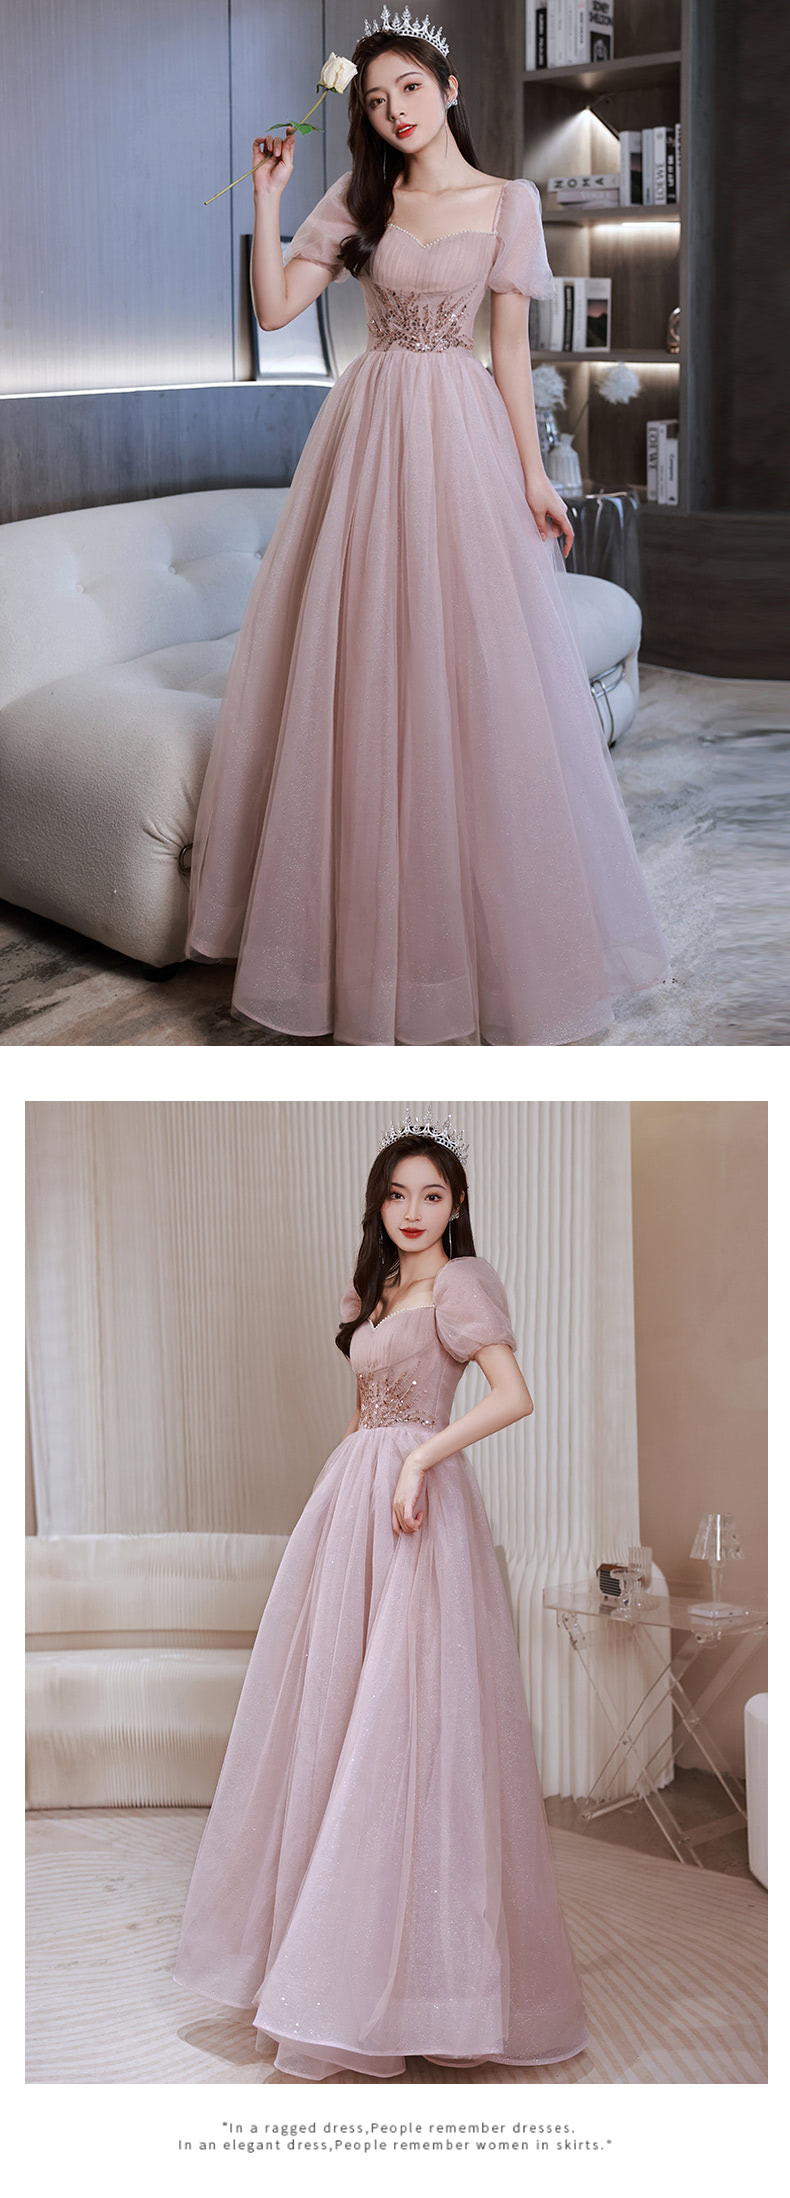 A-Line-Simple-Pink-Tulle-Graduation-Homecoming-Prom-Party-Dress16.jpg